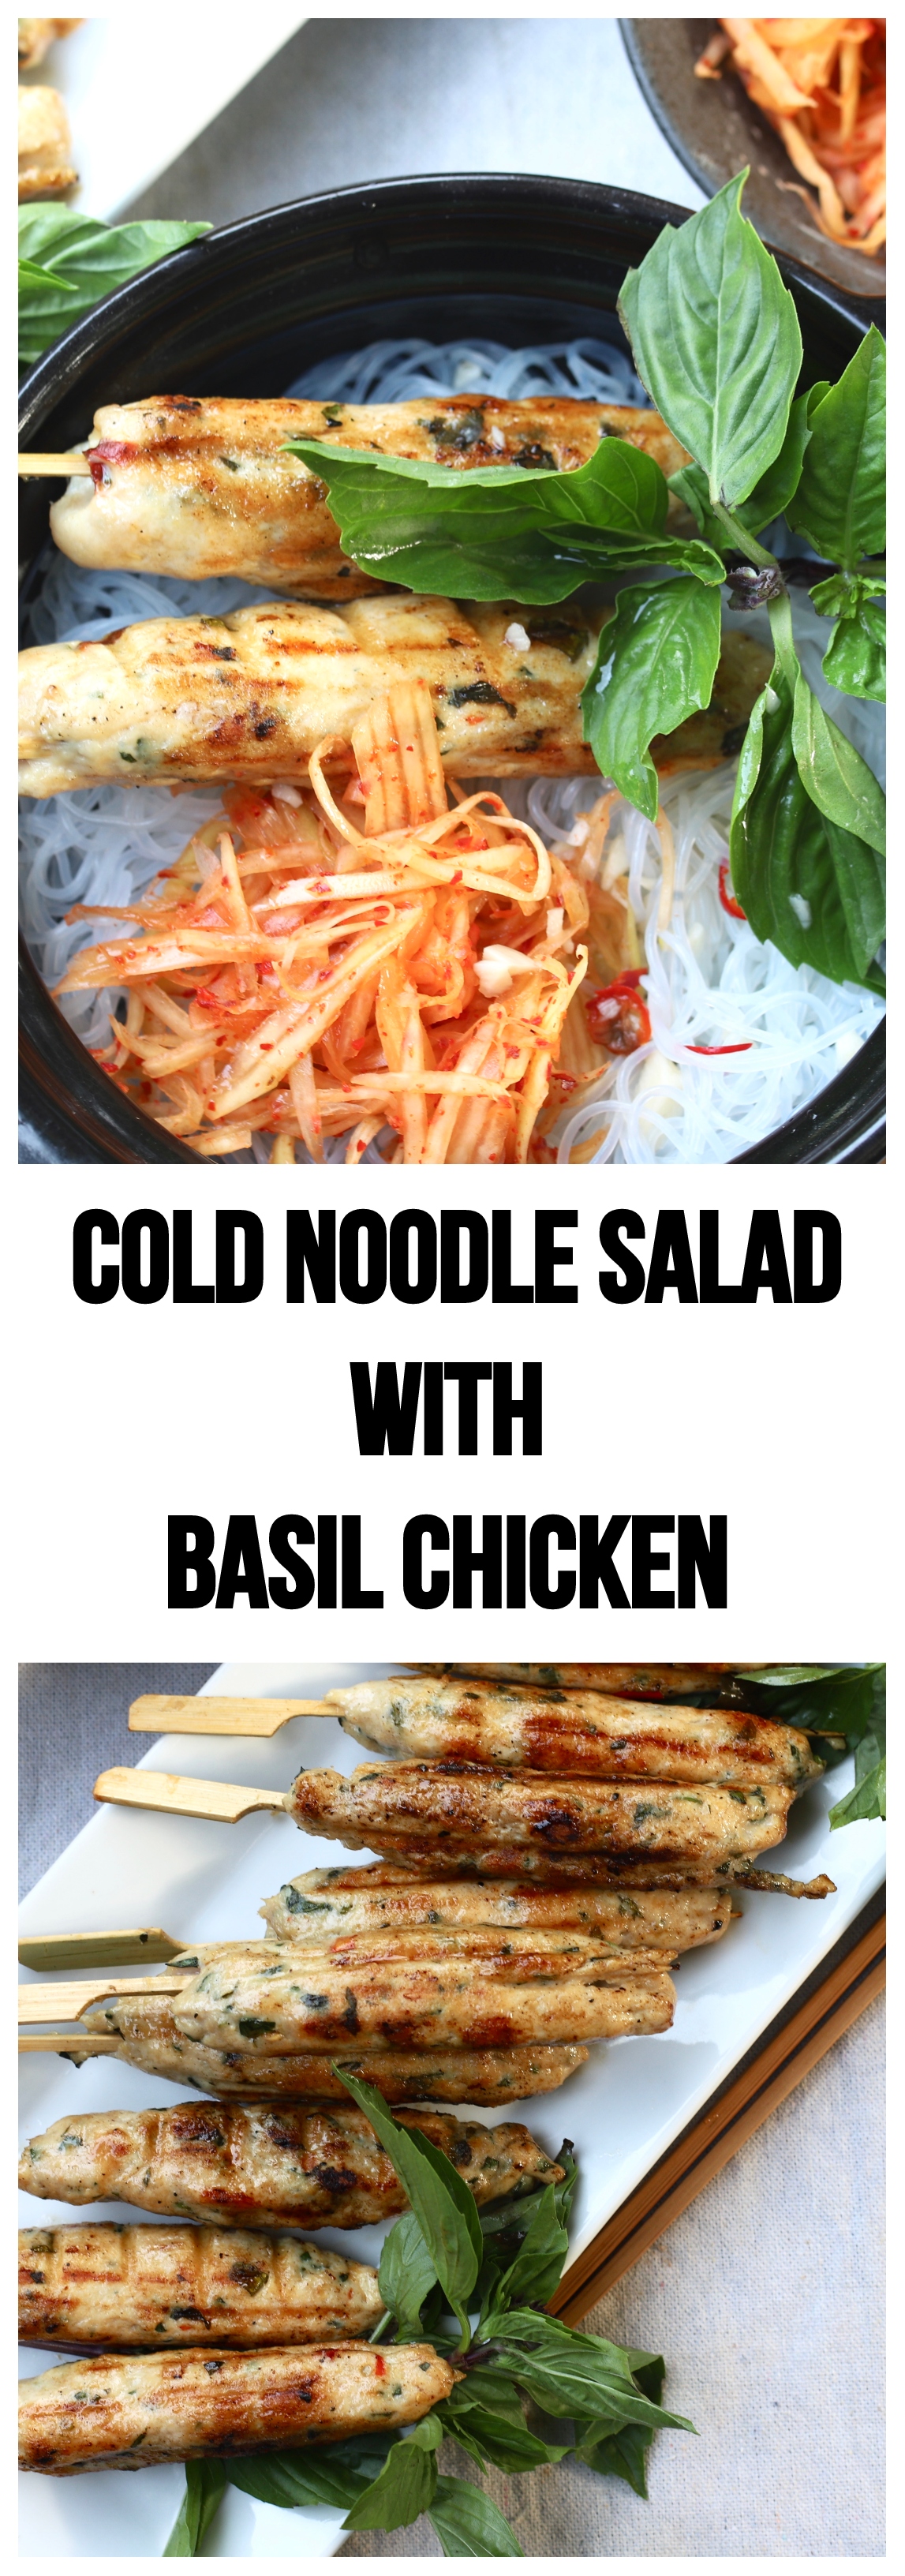 Cold Noodle Salad with Basil Chicken